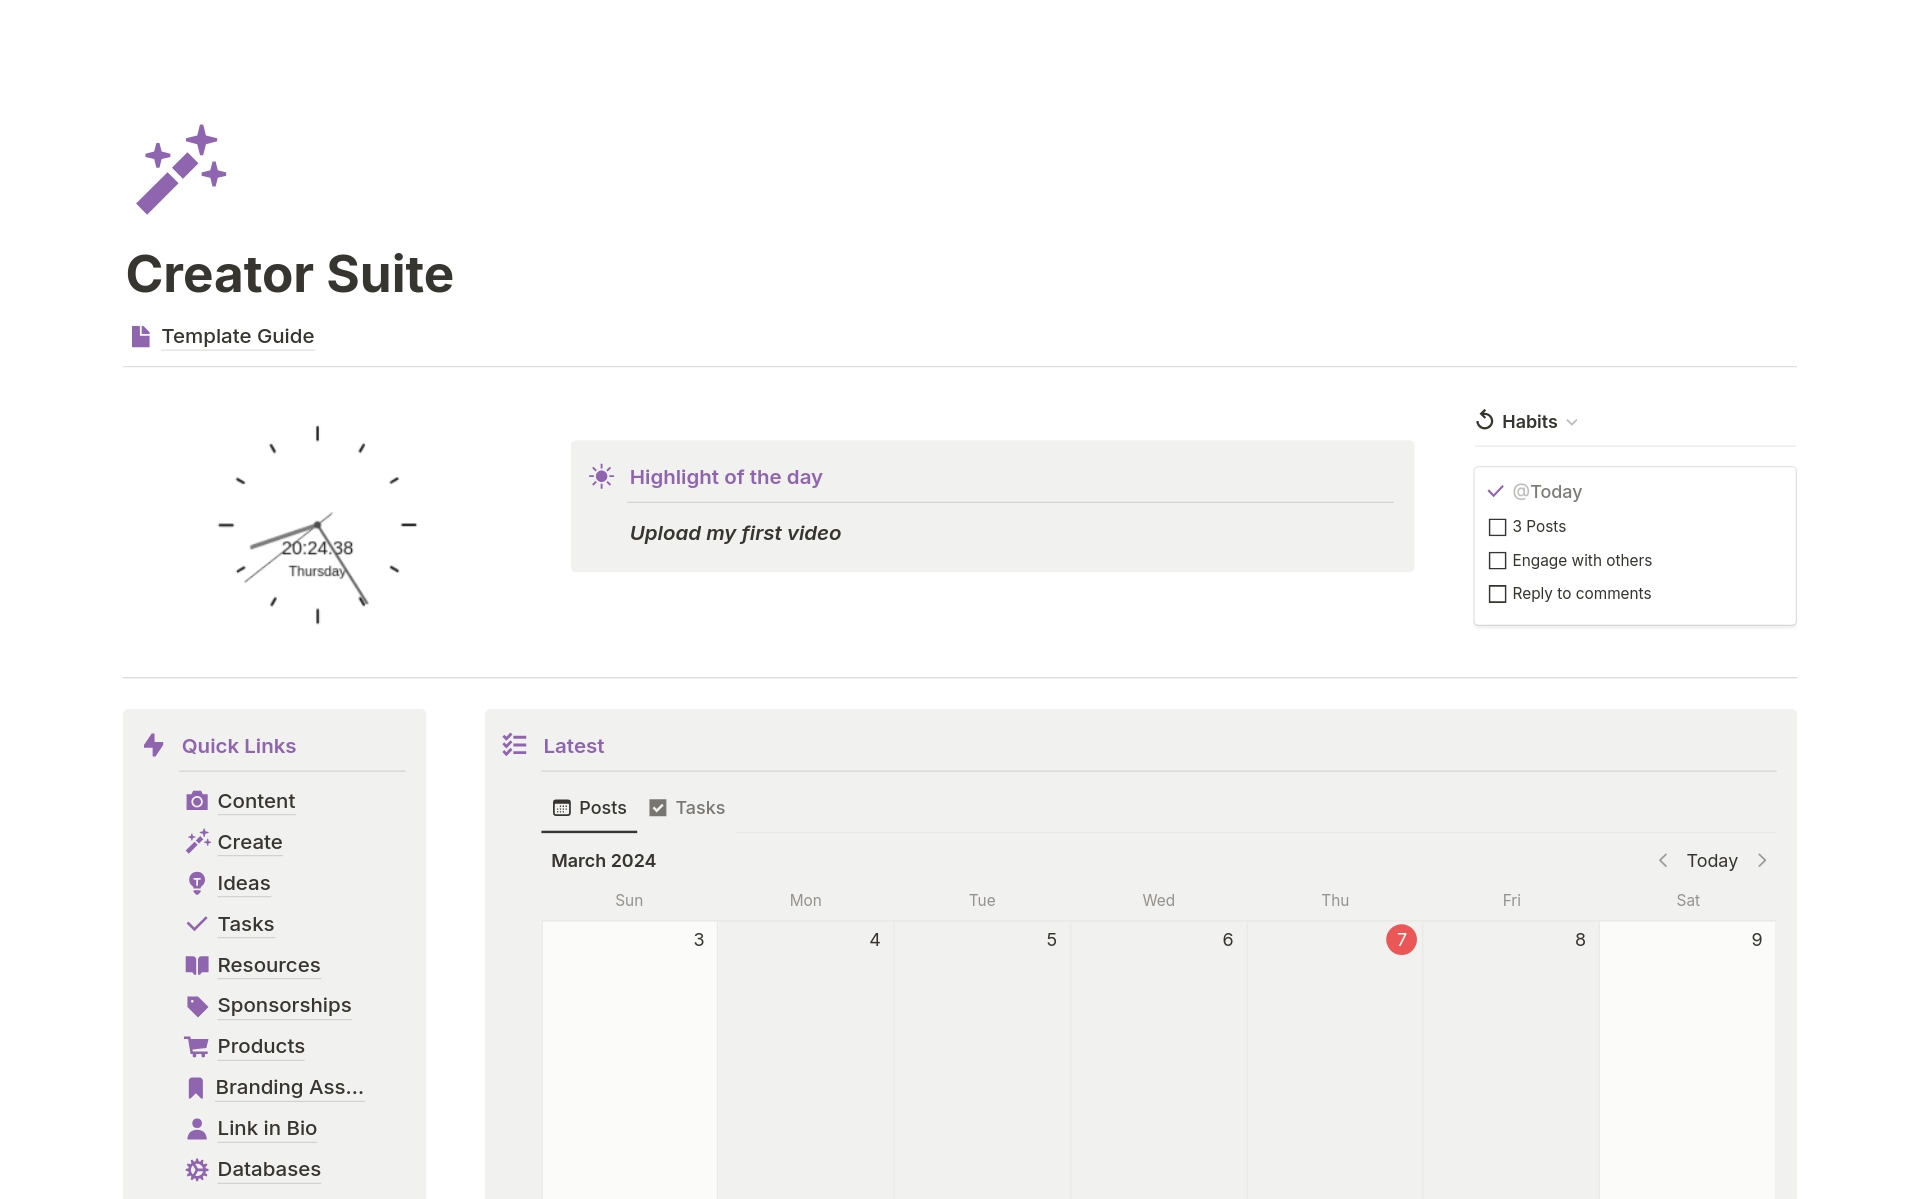 Creator Suite is a complete workspace for content creators. It helps to write, organize and schedule content. Store your ideas and resources, manage tasks and keep yourself accountable with daily creative habits.